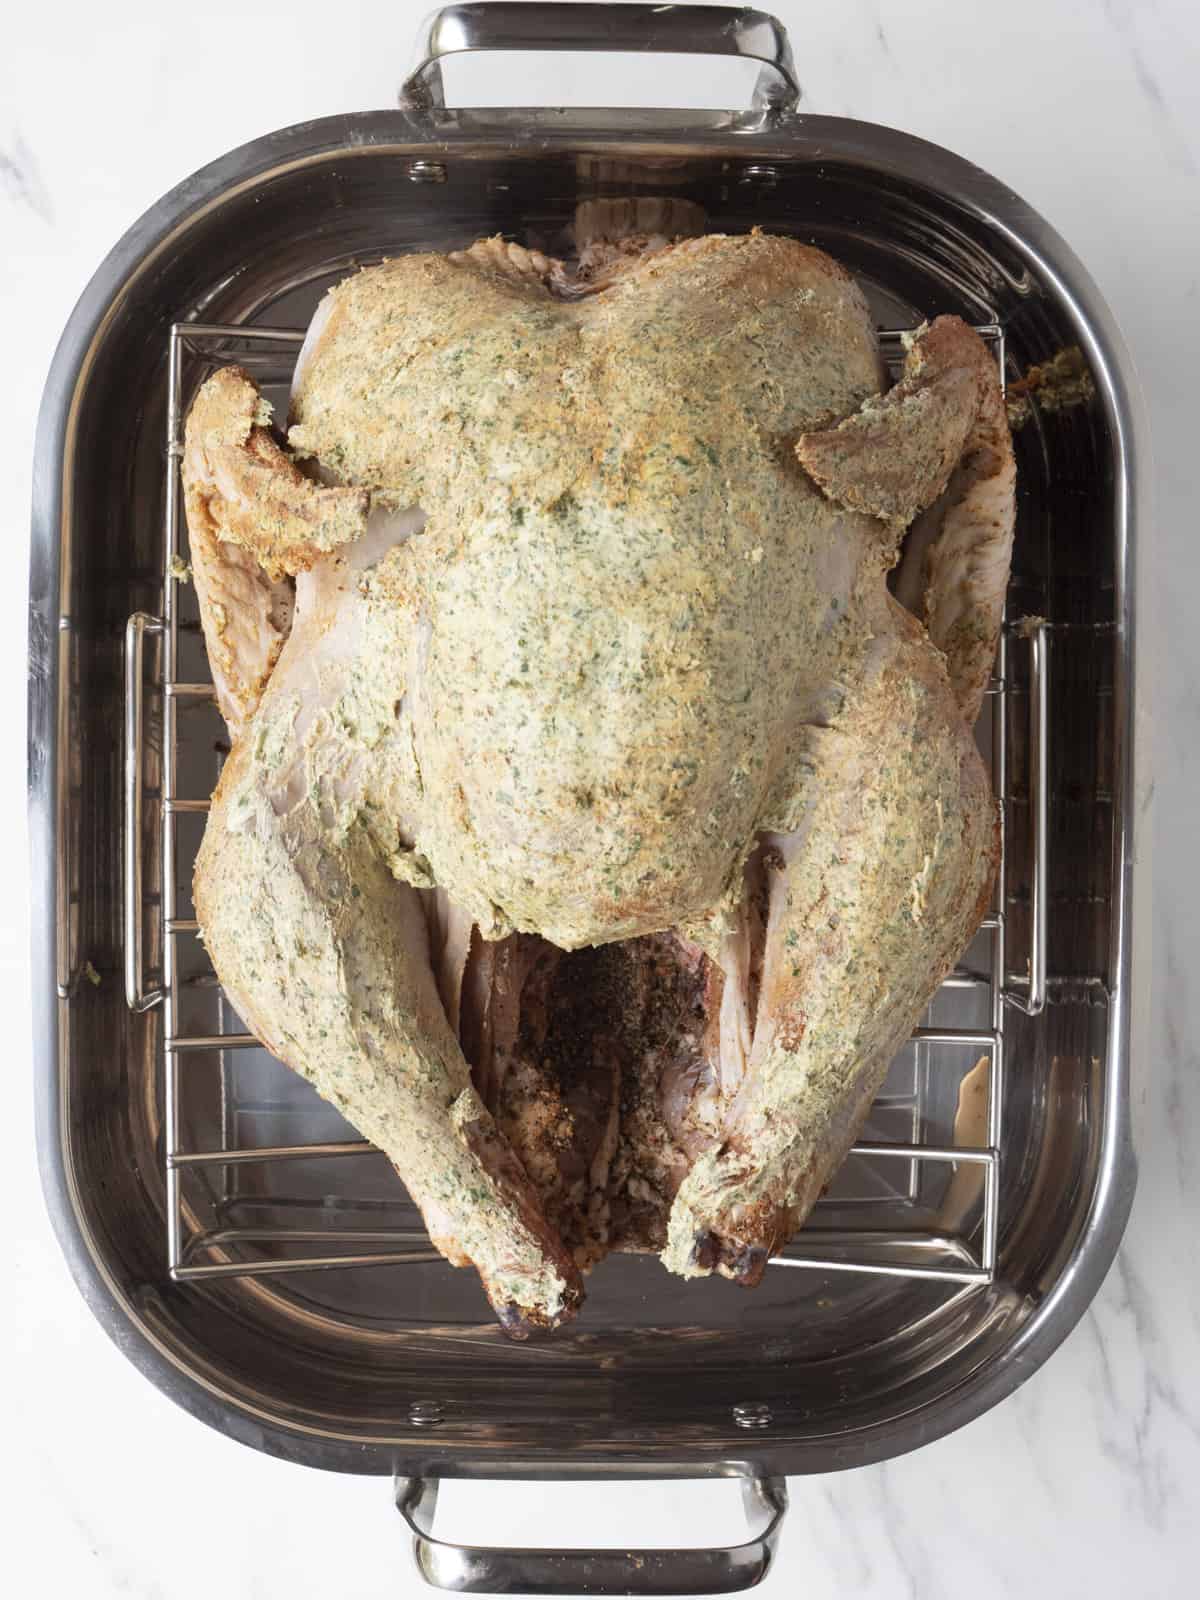 A roasting pan with a wire rack and a whole turkey placed on top, yet to be cooked.